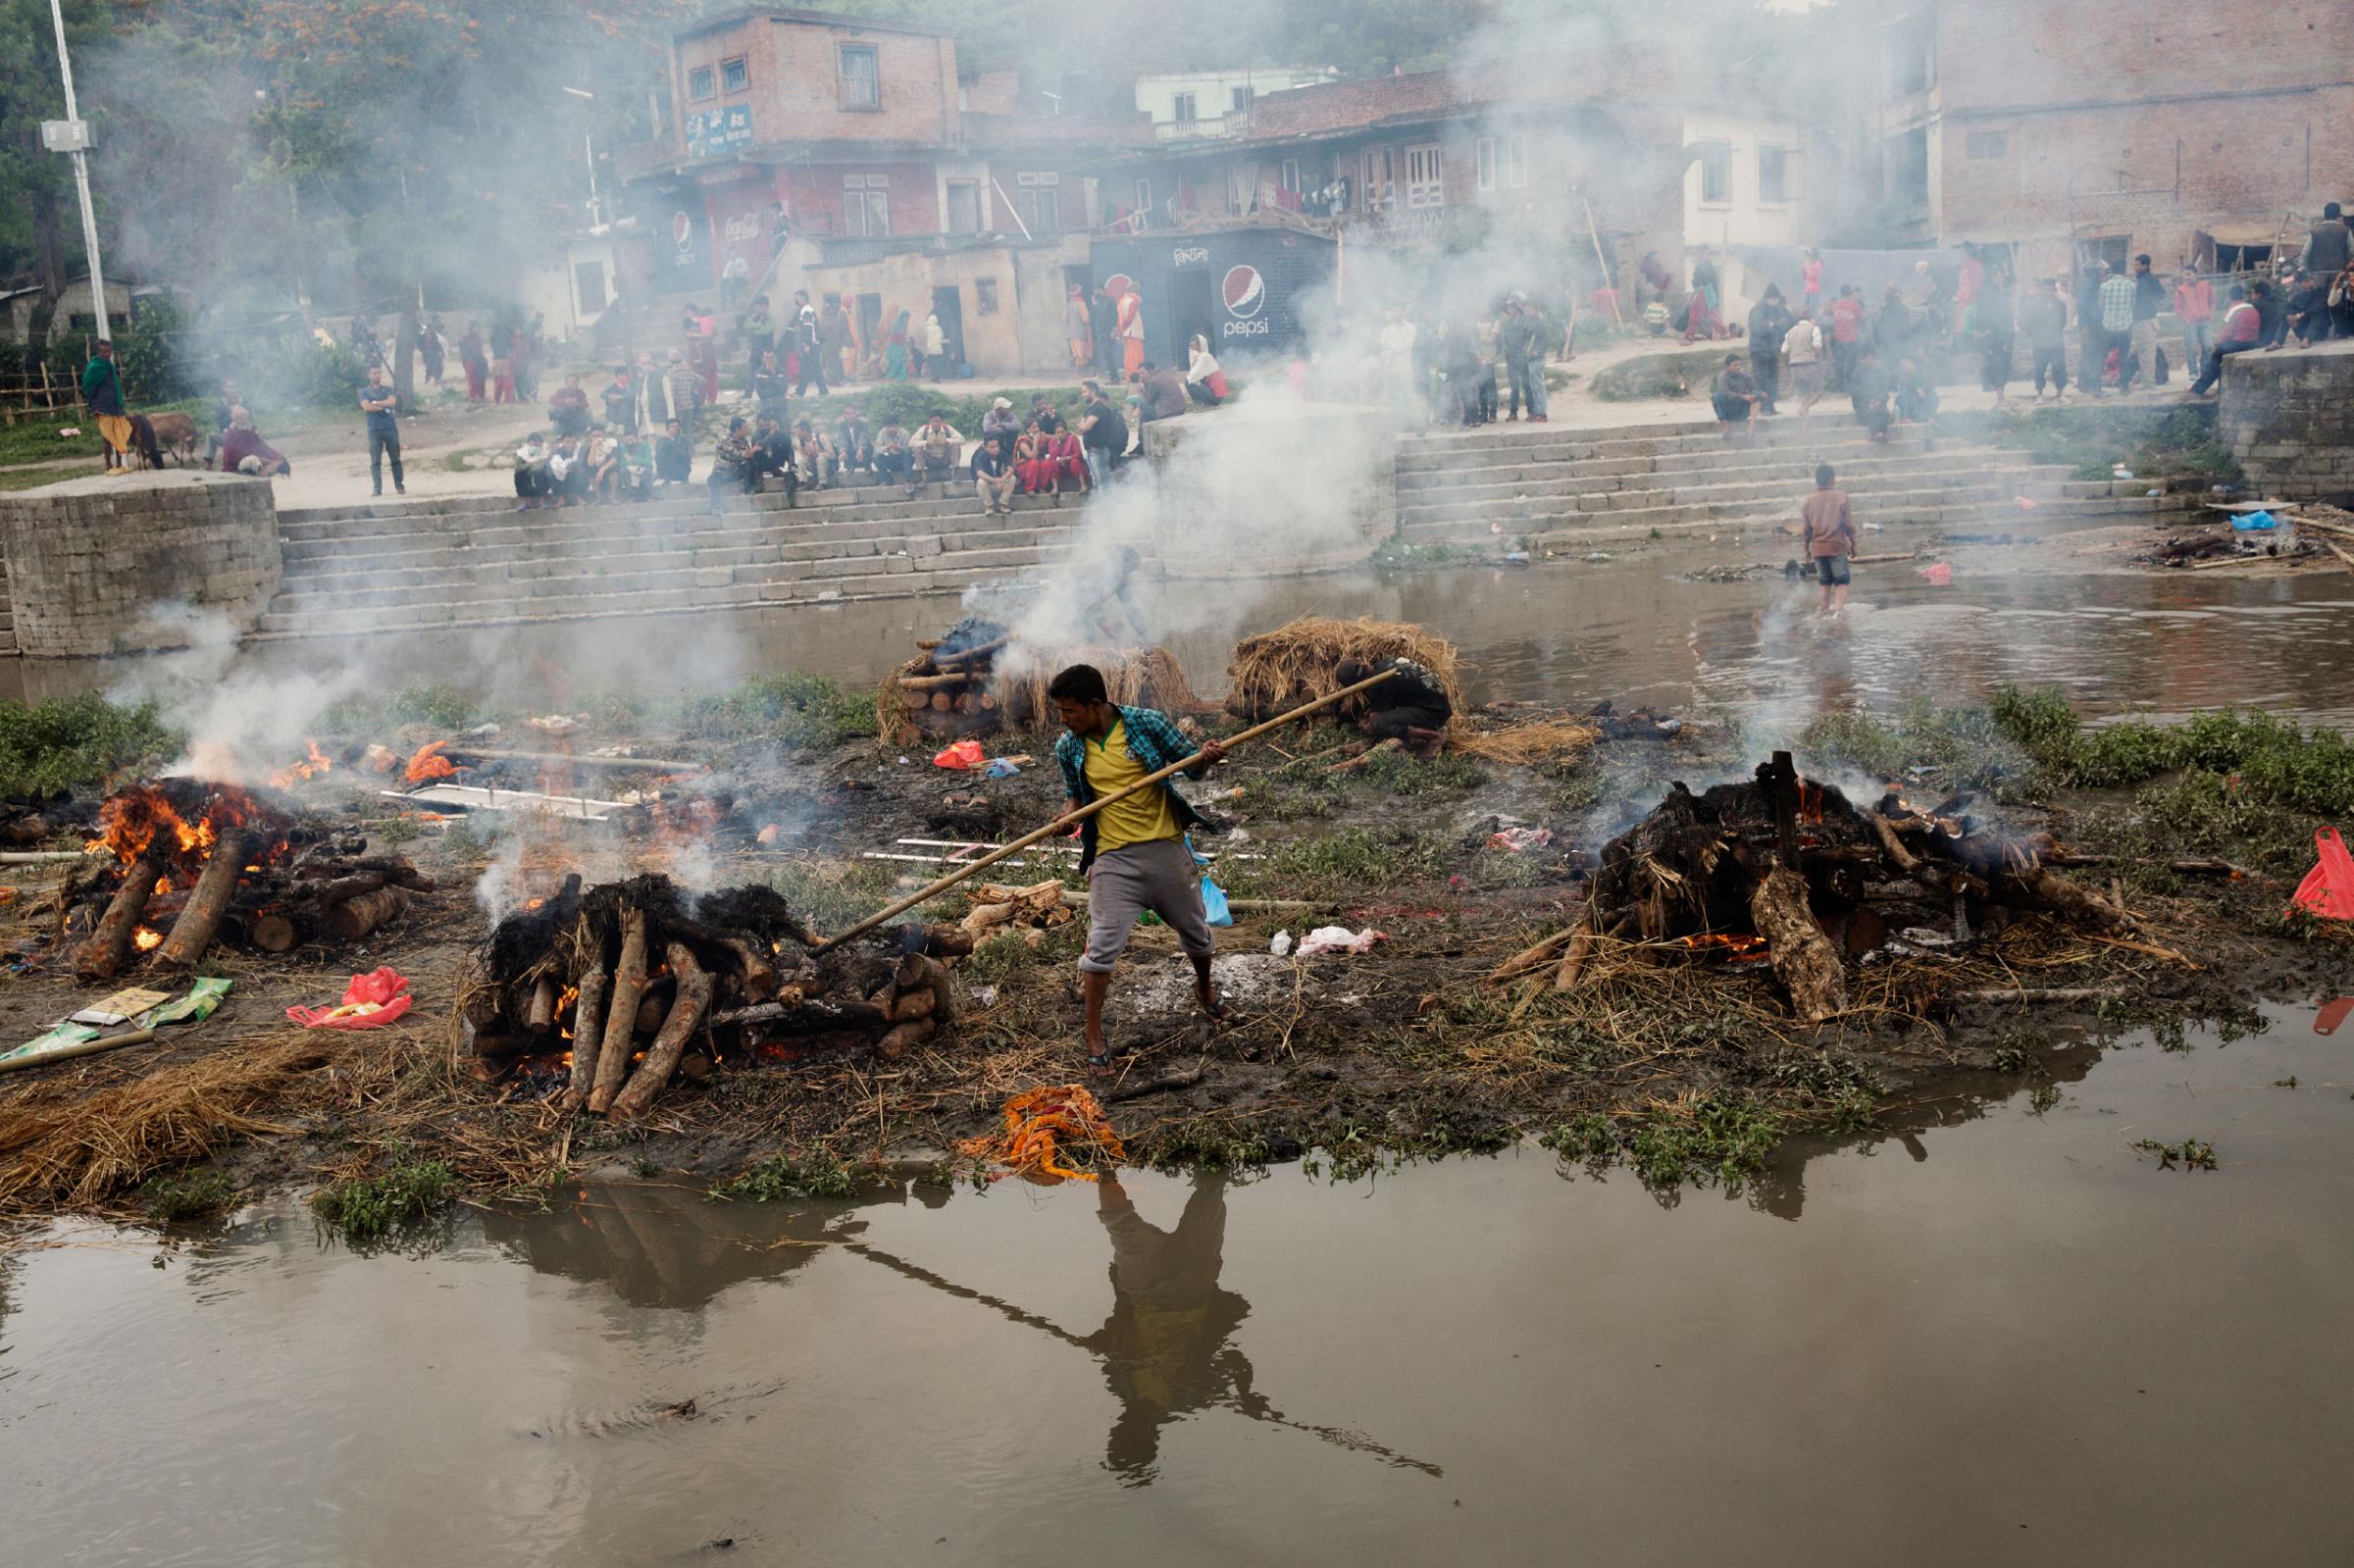 A Hindu Nepali man tends to a funeral pyre built for a person killed in the earthquake in Nepal, on the river in Kathmandu, Nepal on April. 27, 2015. Nepal had a severe earthquake on April 25th. Photo by Adam Ferguson for Time